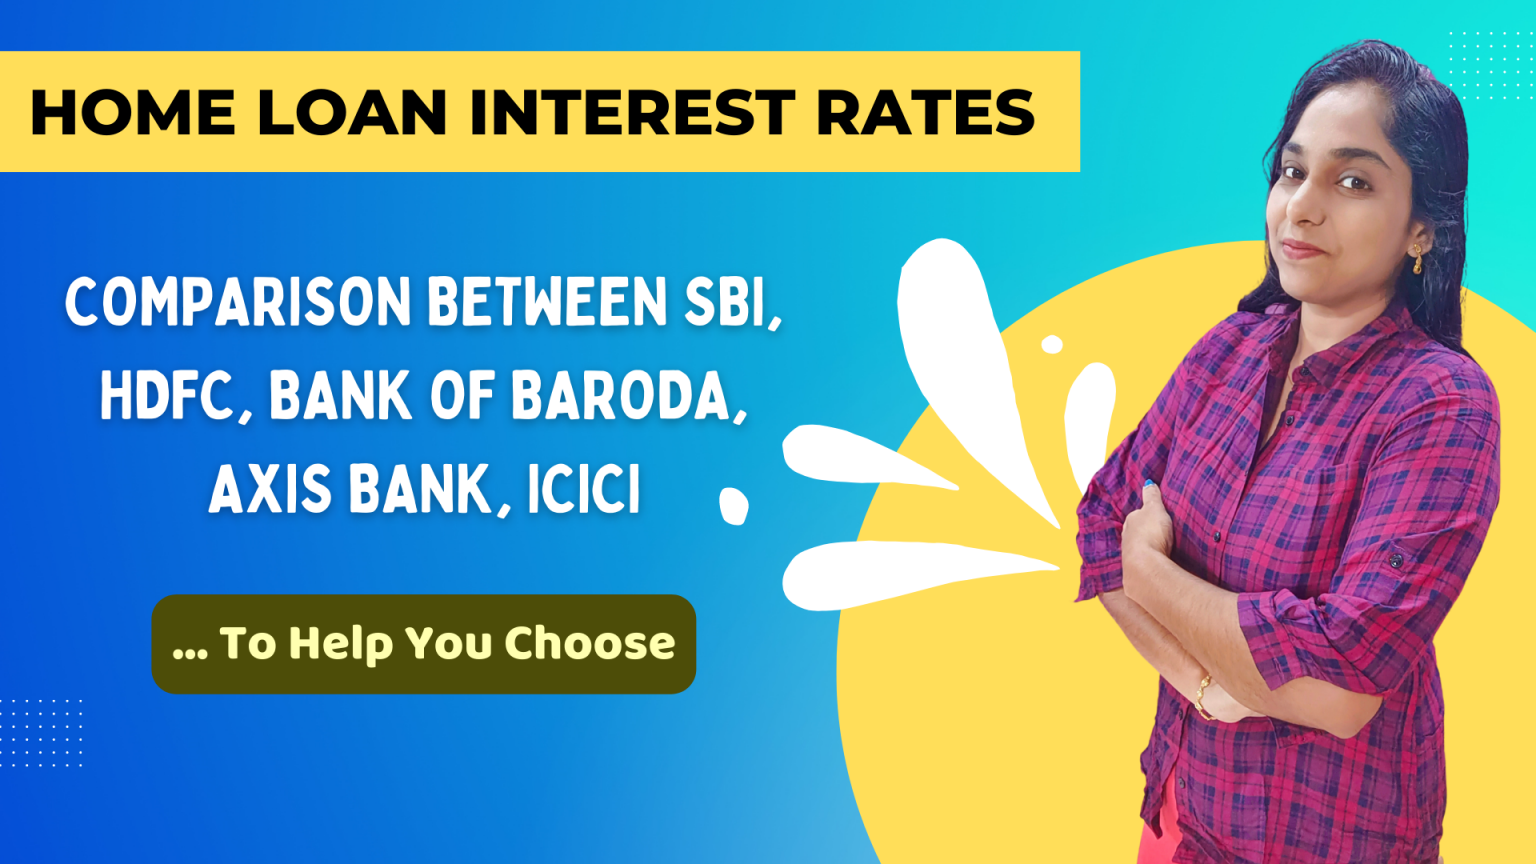 Home Loan Interest Rates Comparison Between Sbi Hdfc Bank Of Baroda Axis Bank To Help You Choose 1448